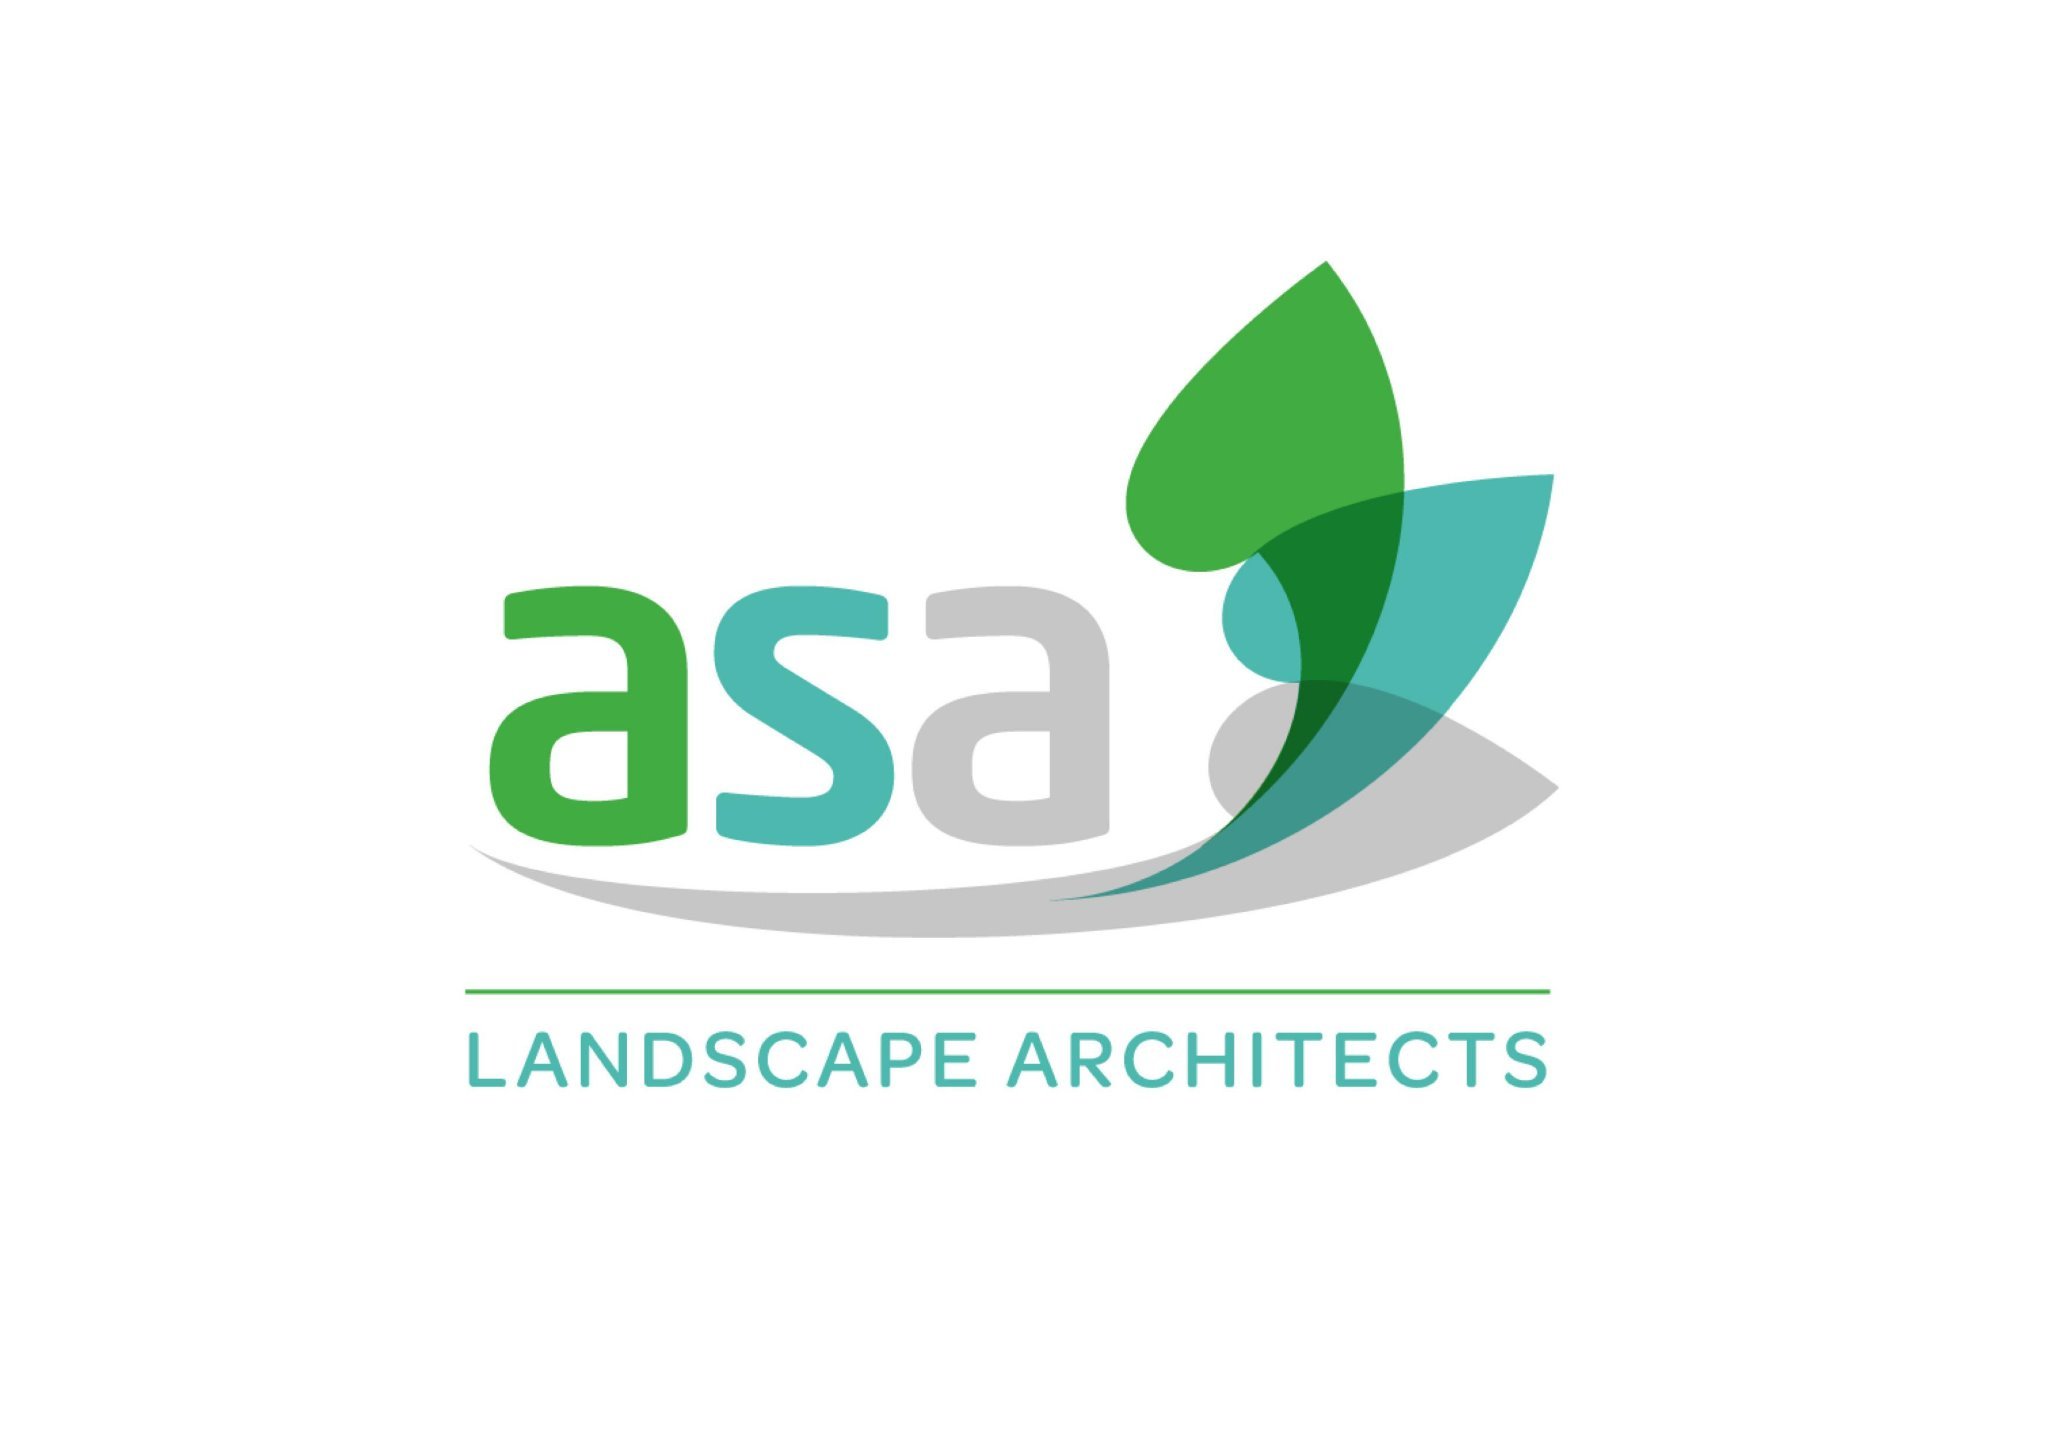 Landscape architects bringing creativity, practicality and personality to landscape design, assessment and management. #SeeLandscapesDifferently